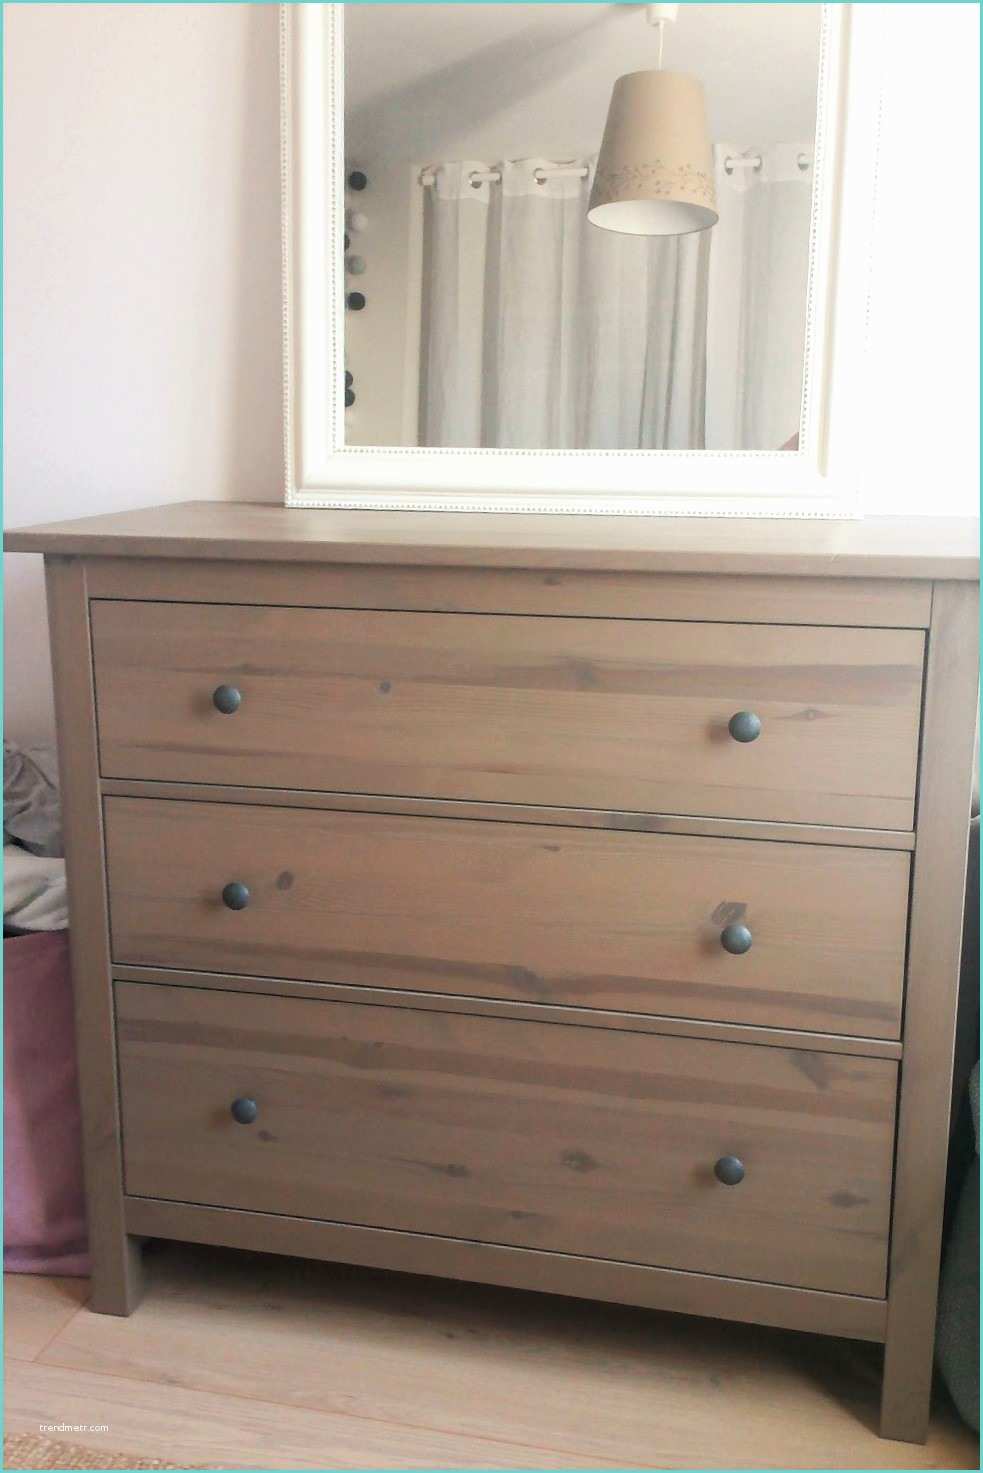 Ikea Hemnes Commode Une Nouvelle Finition Pour Ma Mode Ikea Home by Marie